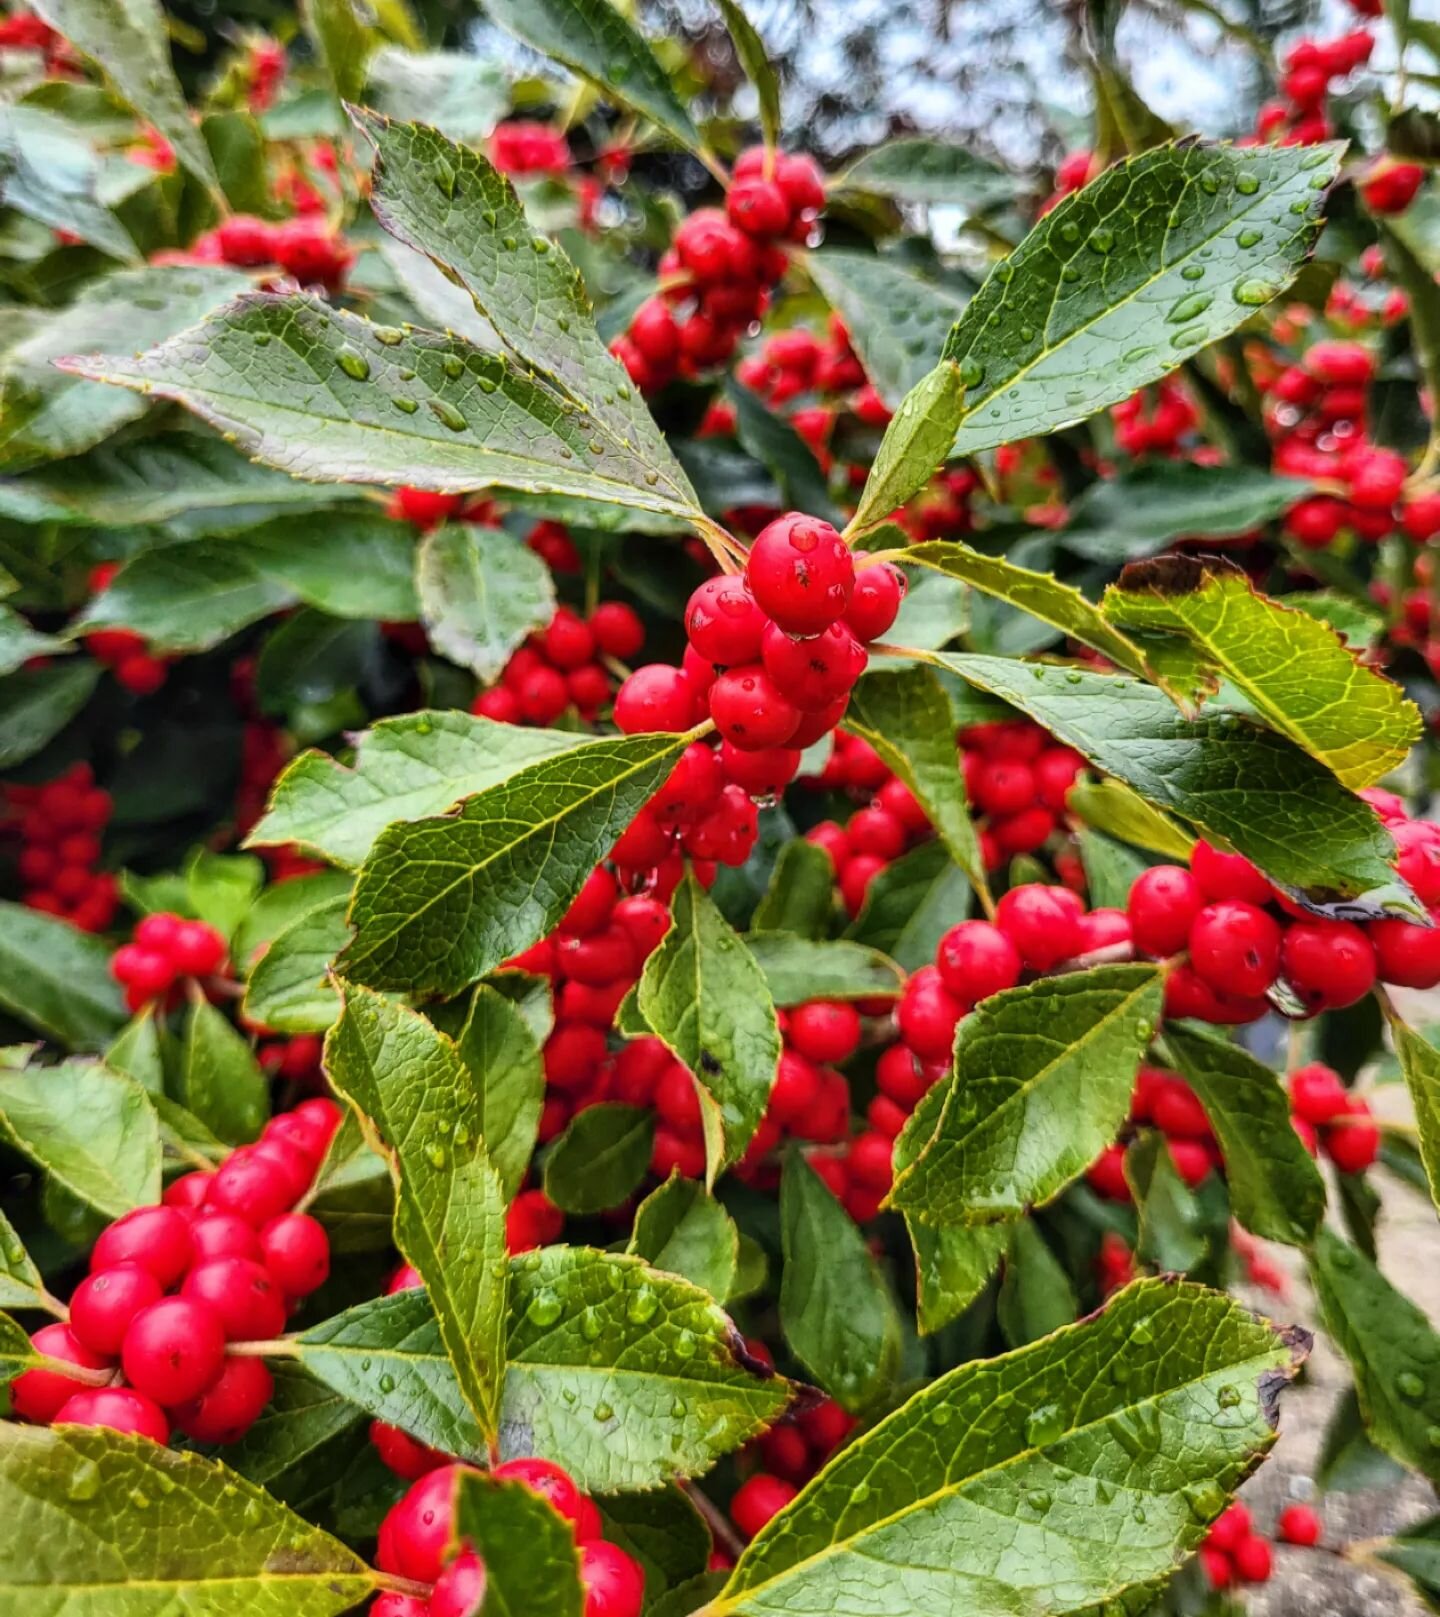 I'm told that the more berries this kind of bush makes, the harsher the coming winter, and, uh, that's a lot of berries 😬